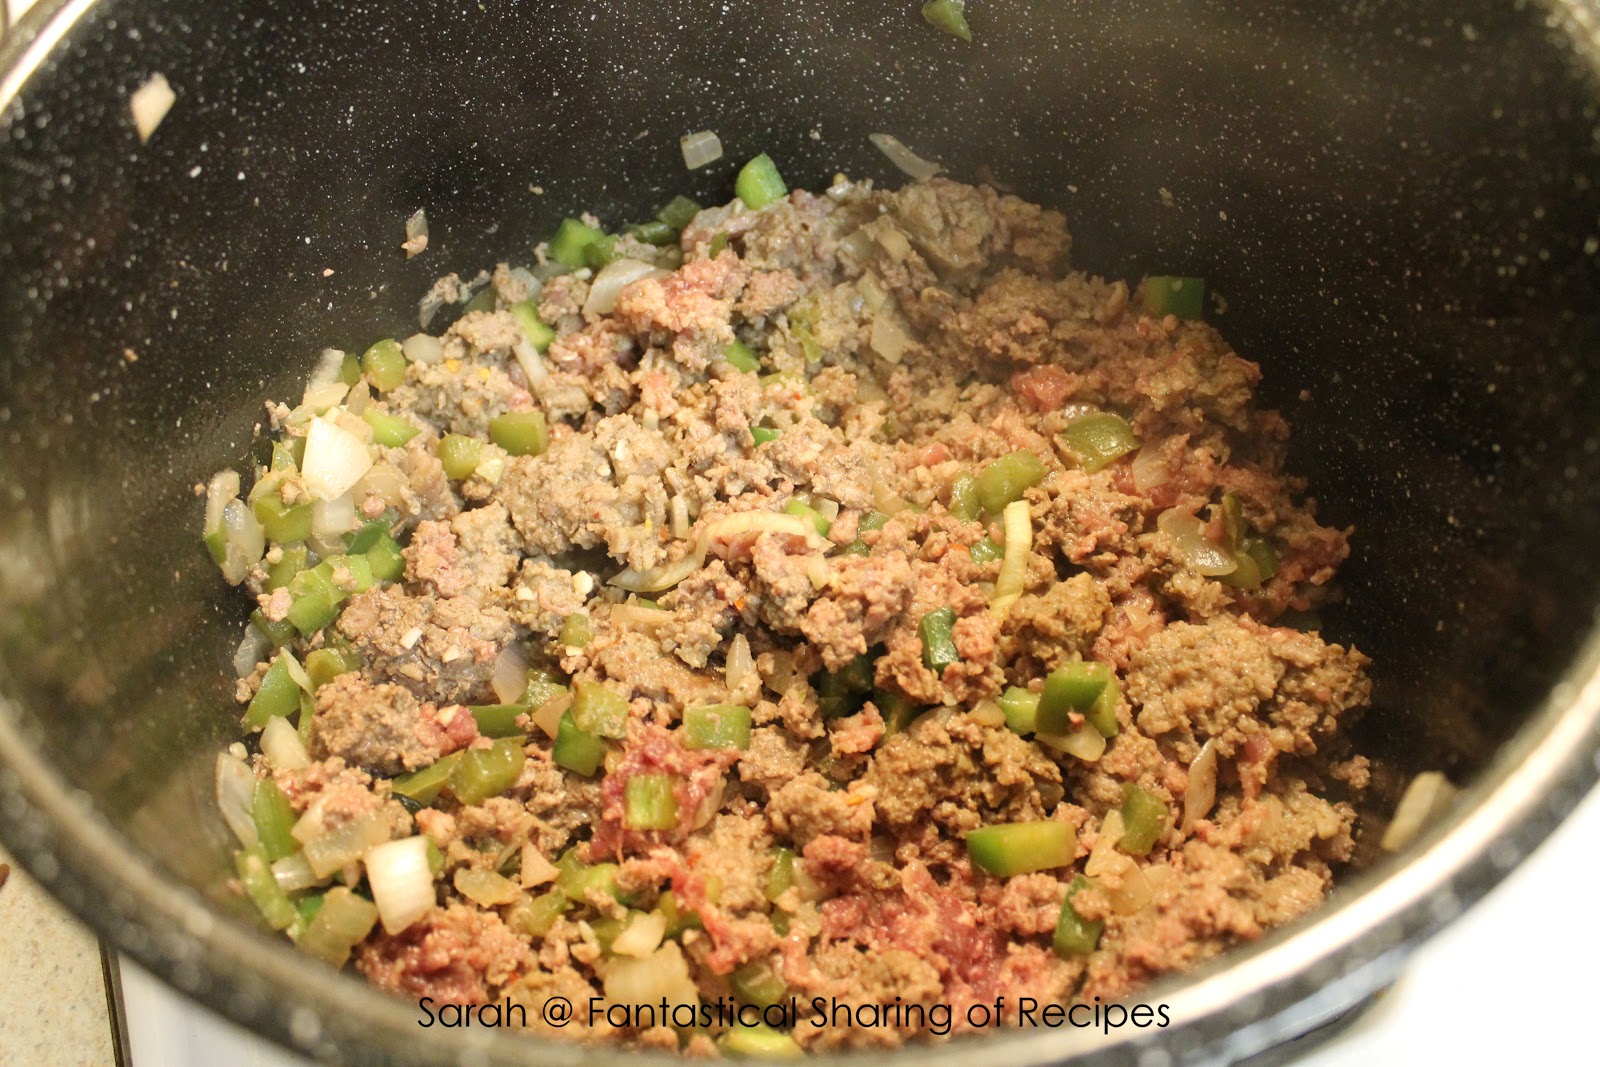 Fantastical Sharing of Recipes: Tennessee Pride Country Chili